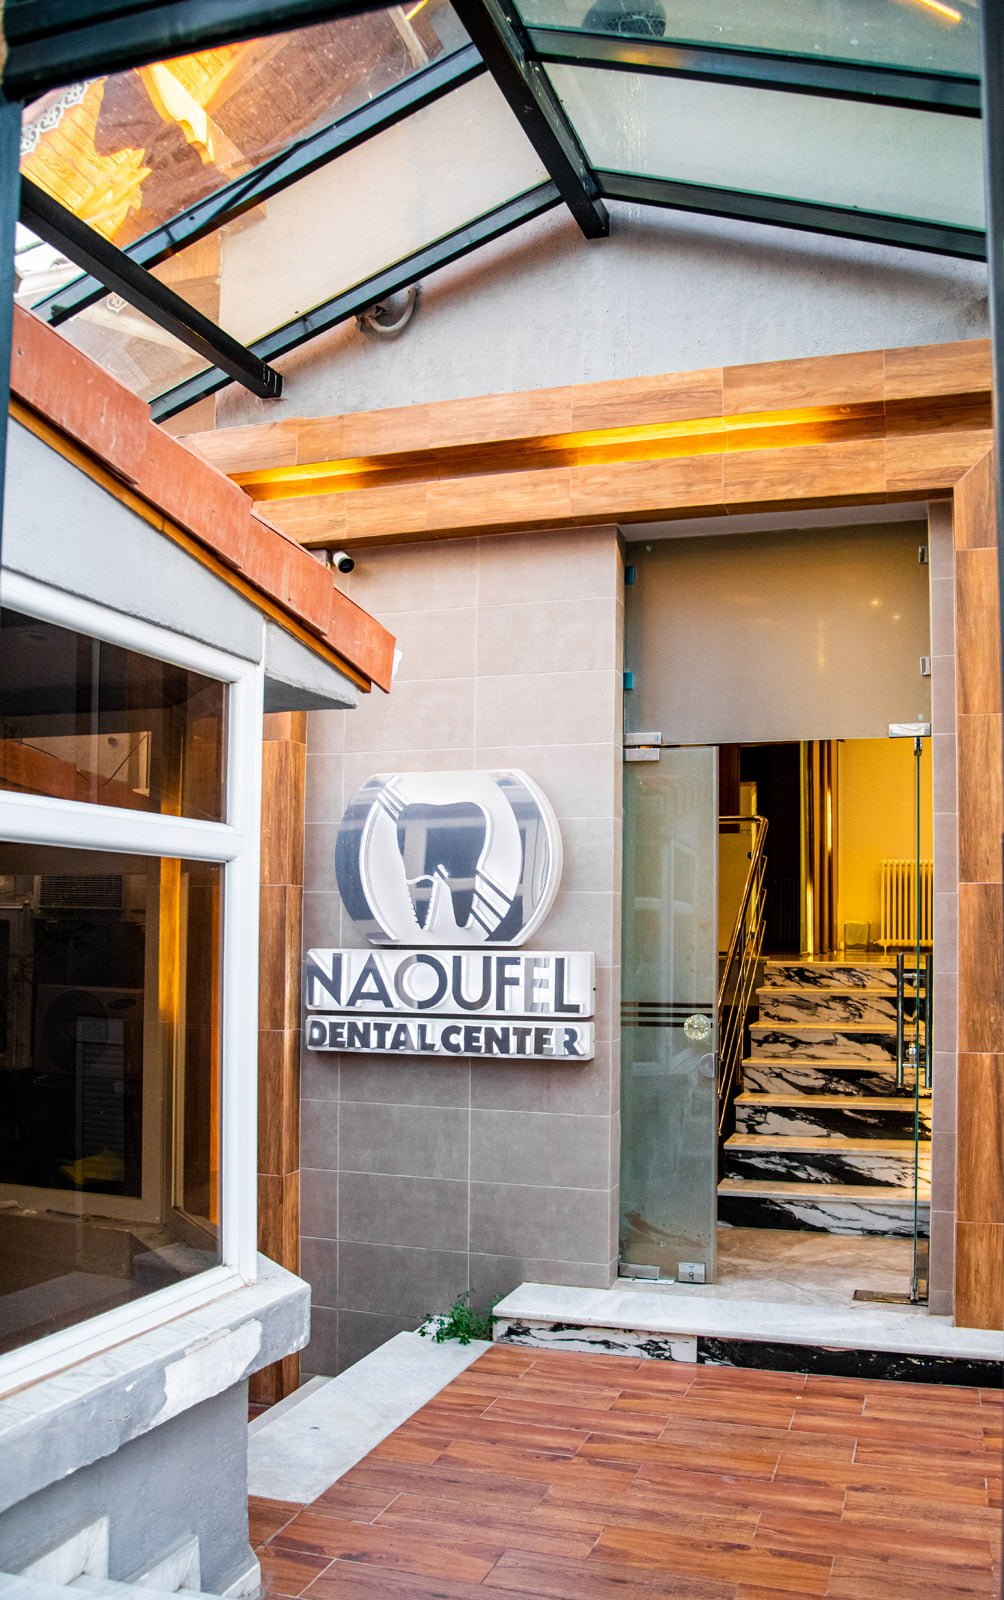 Entrance of the Naoufel Dental Center, Dental Clinic in Algeria, Constantine